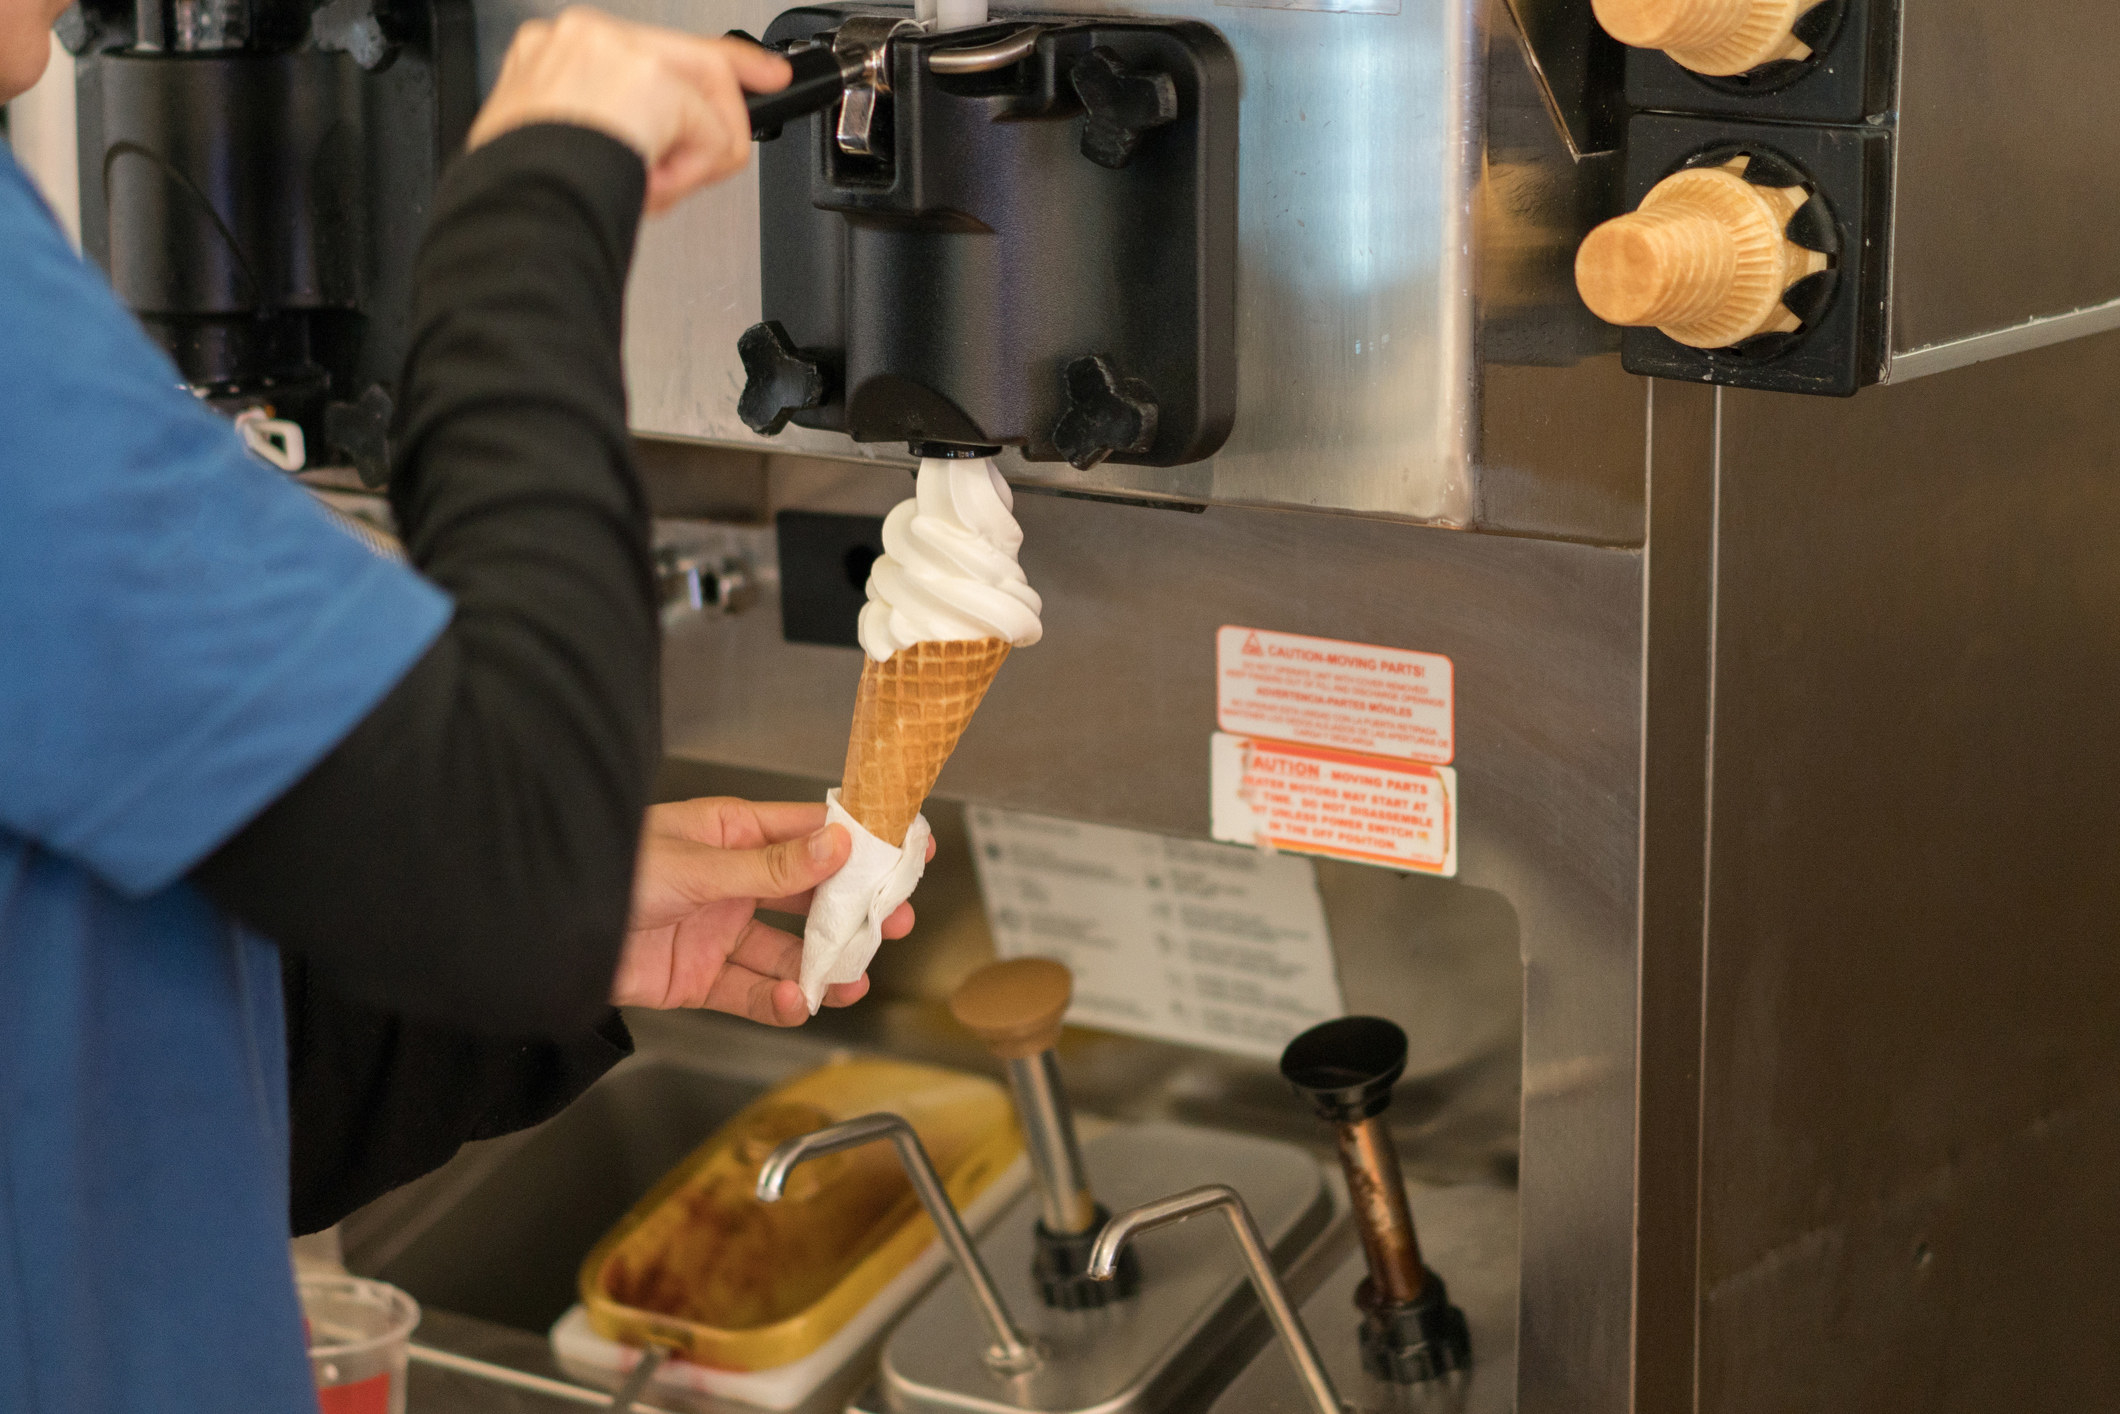 Someone filling a cone at an ice cream machine